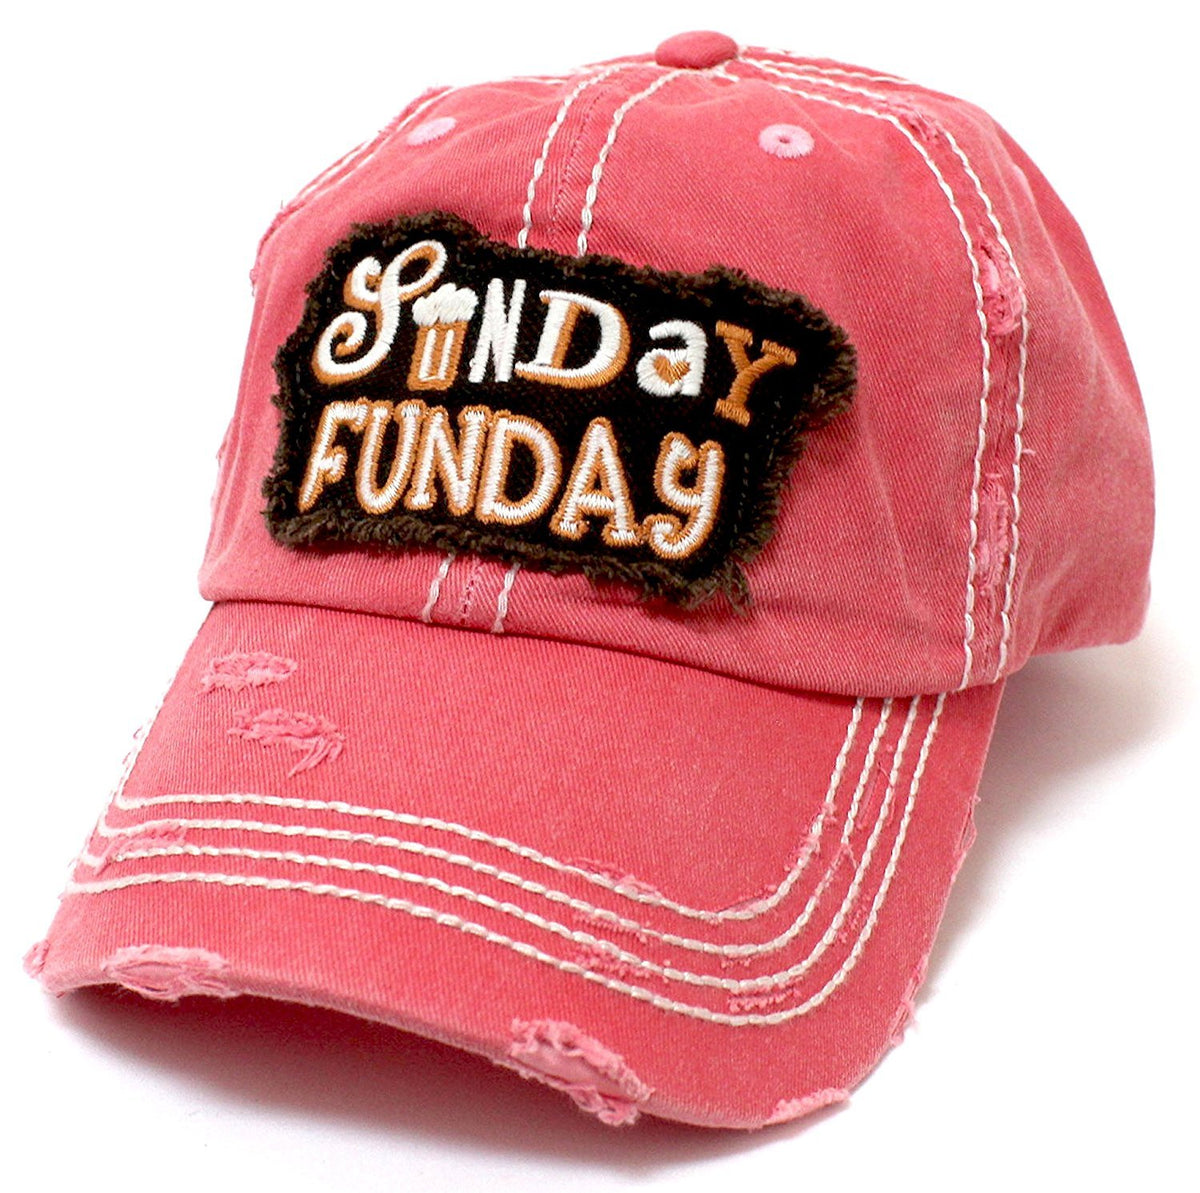 PINK "SUNDAY FUNDAY" Patch Embroidery Vintage Baseball Hat - Caps 'N Vintage 